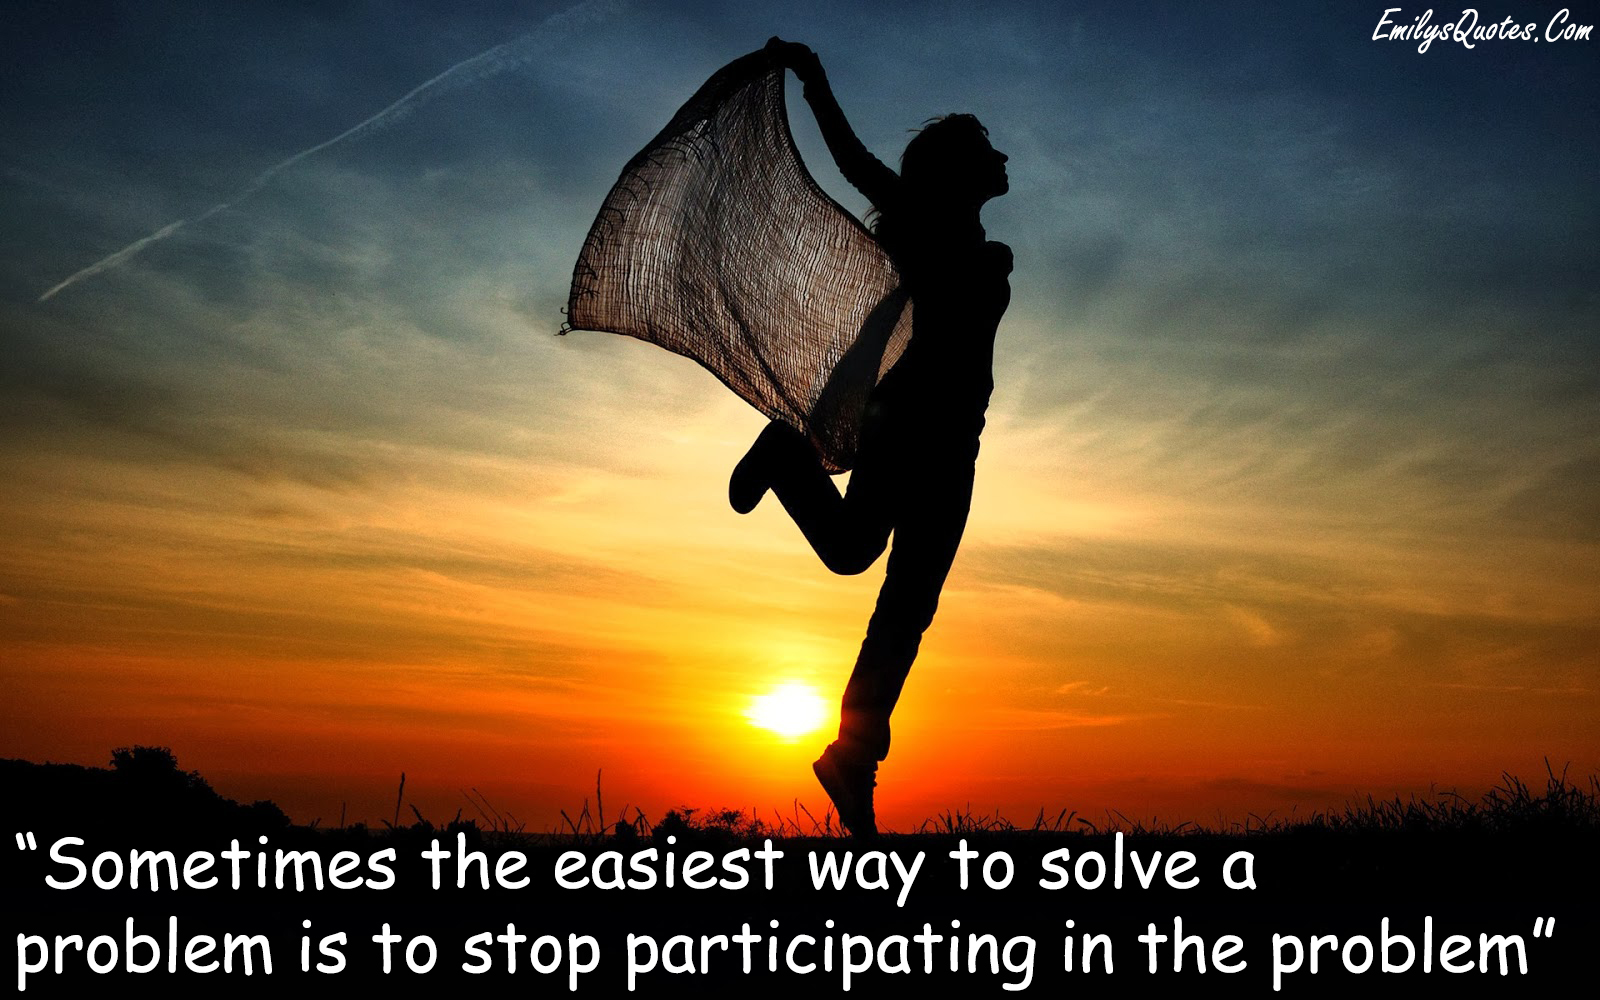 Sometimes the easiest way to solve a problem is to stop